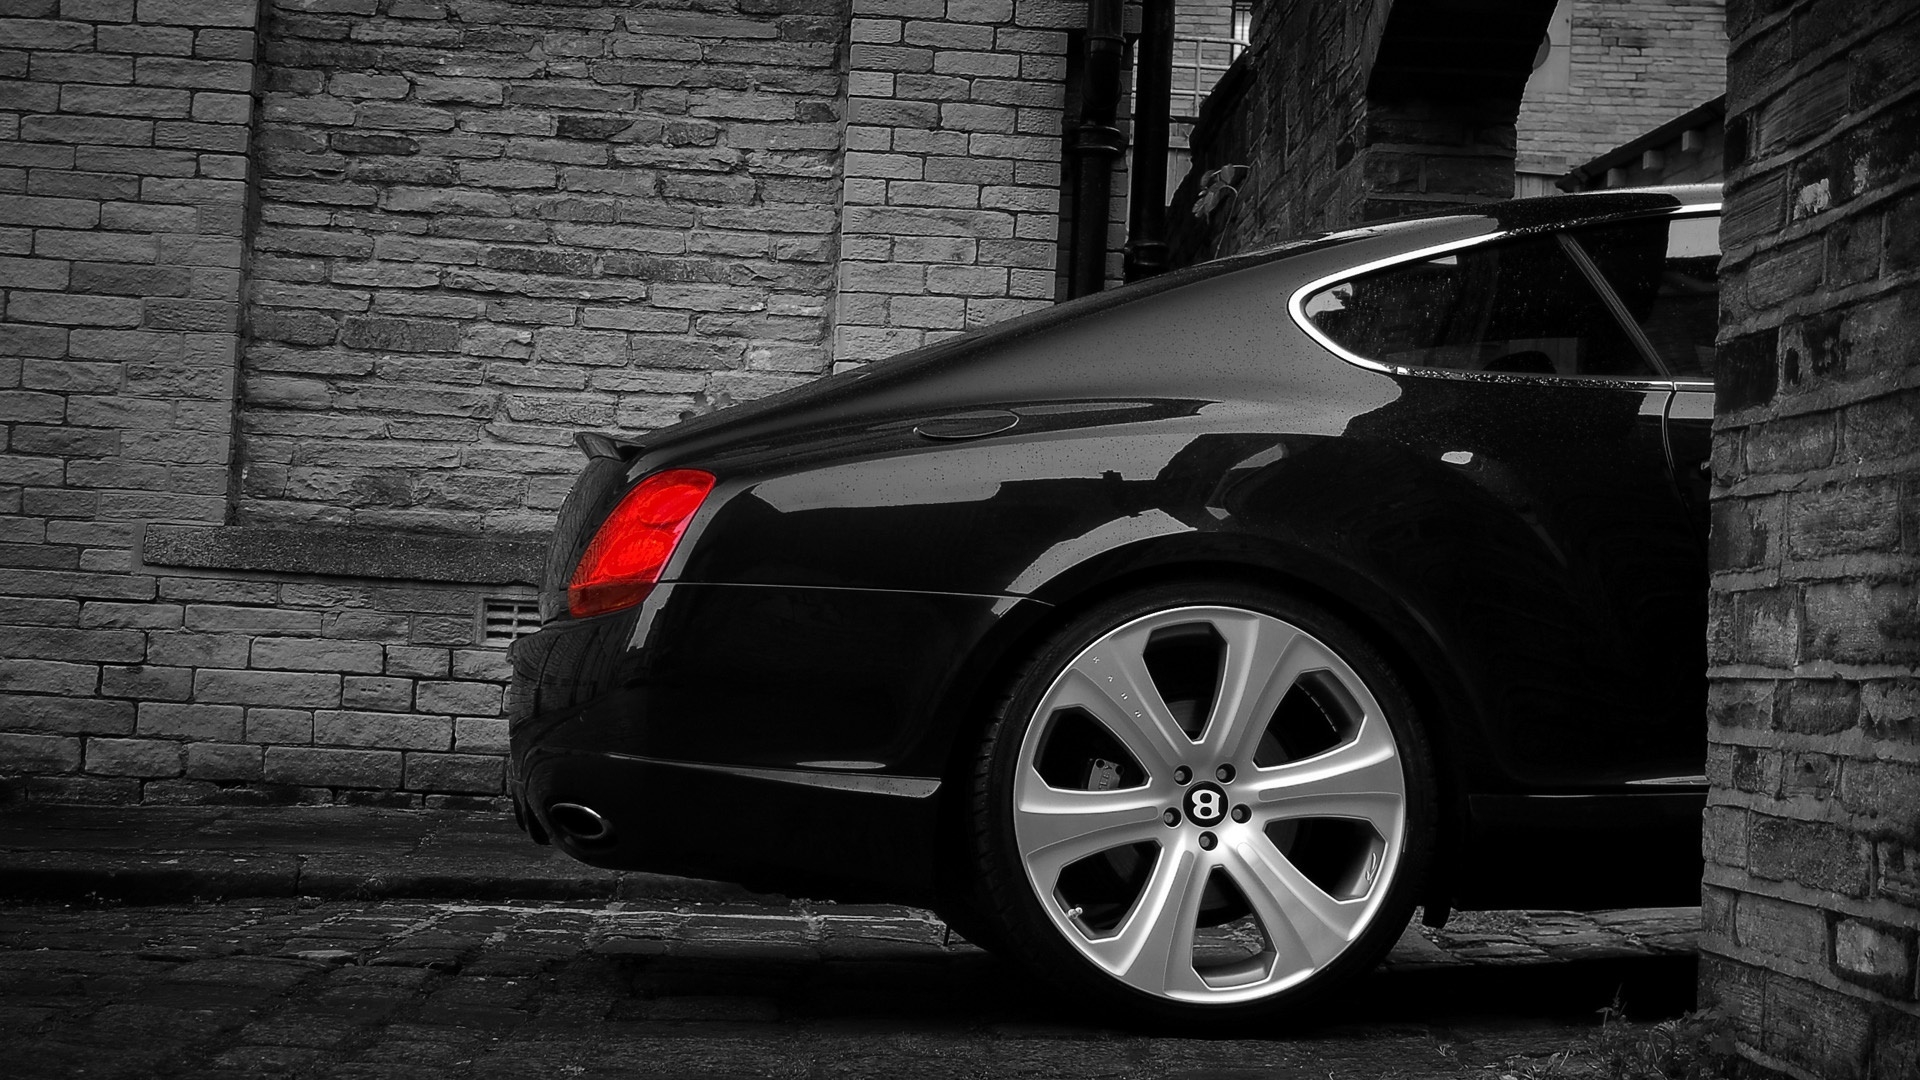 Bentley Continental GT S Project Kahn 2008 Rear for 1920 x 1080 HDTV 1080p resolution